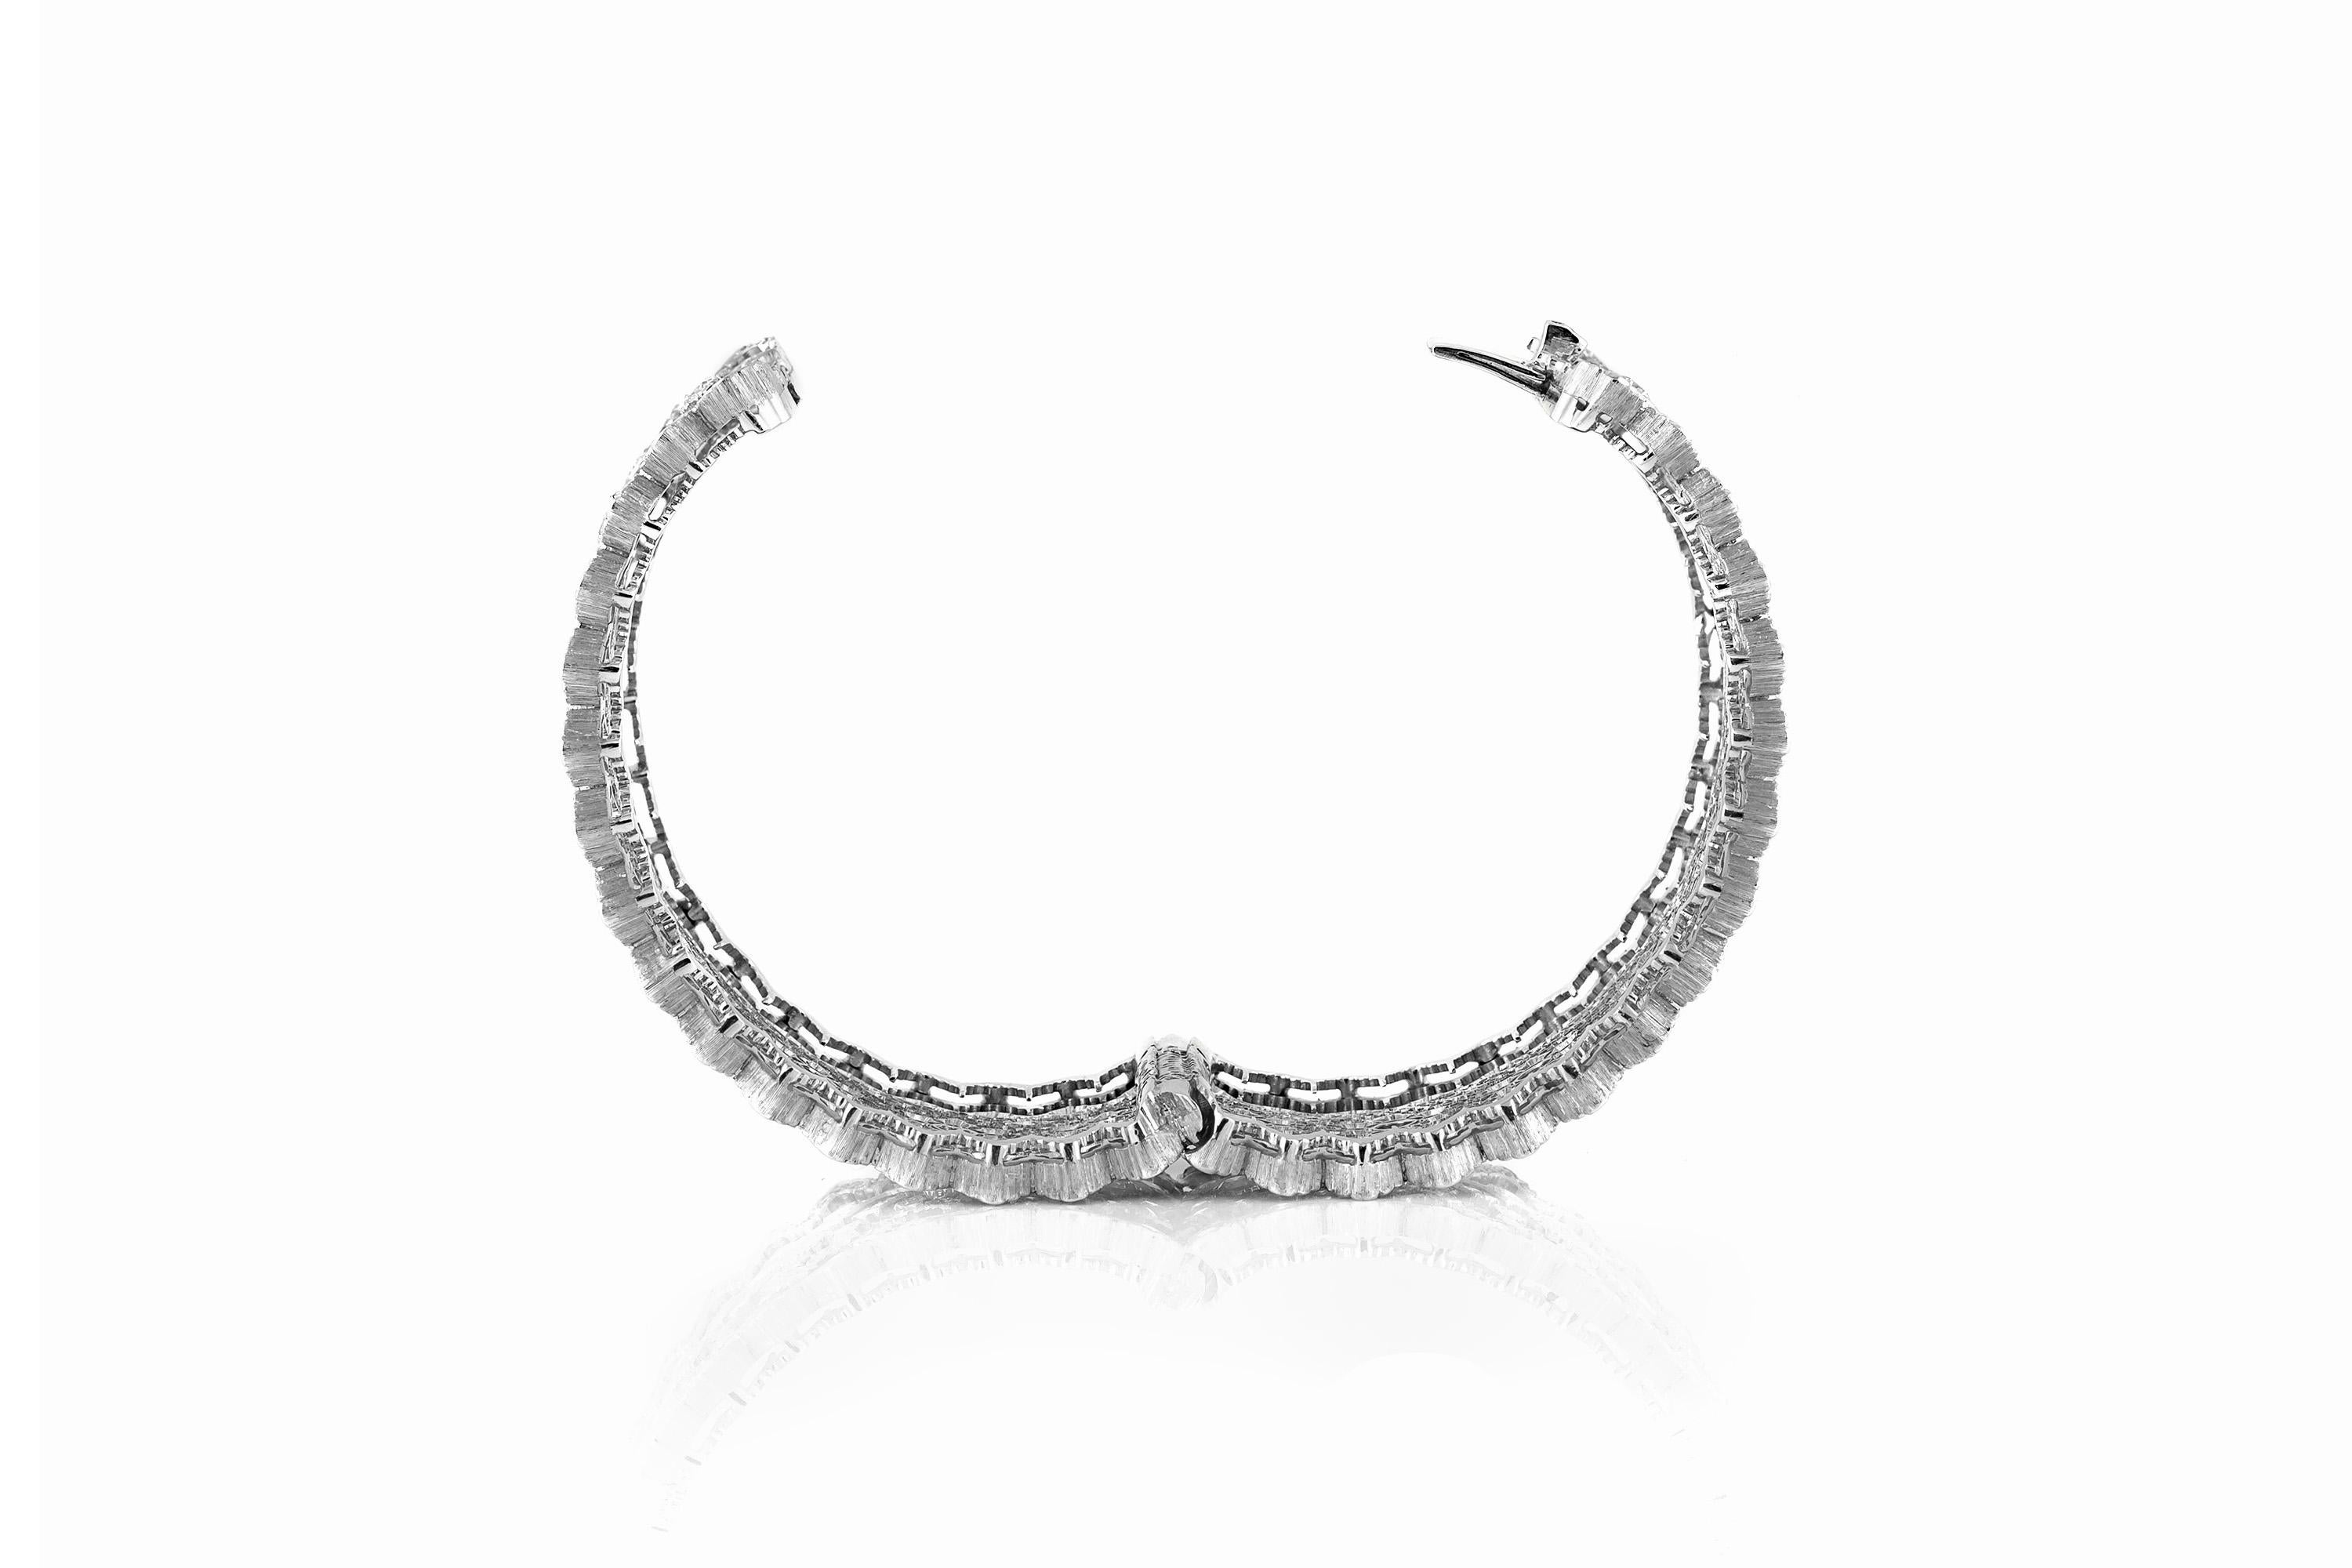 Cuff bracelet, finely crafted in 18k white gold and brilliant cut white diamonds. Clasp cuff enclosure bracelet.
Signed by Buccellati.  For additional information, images, or videos, please inquire within.